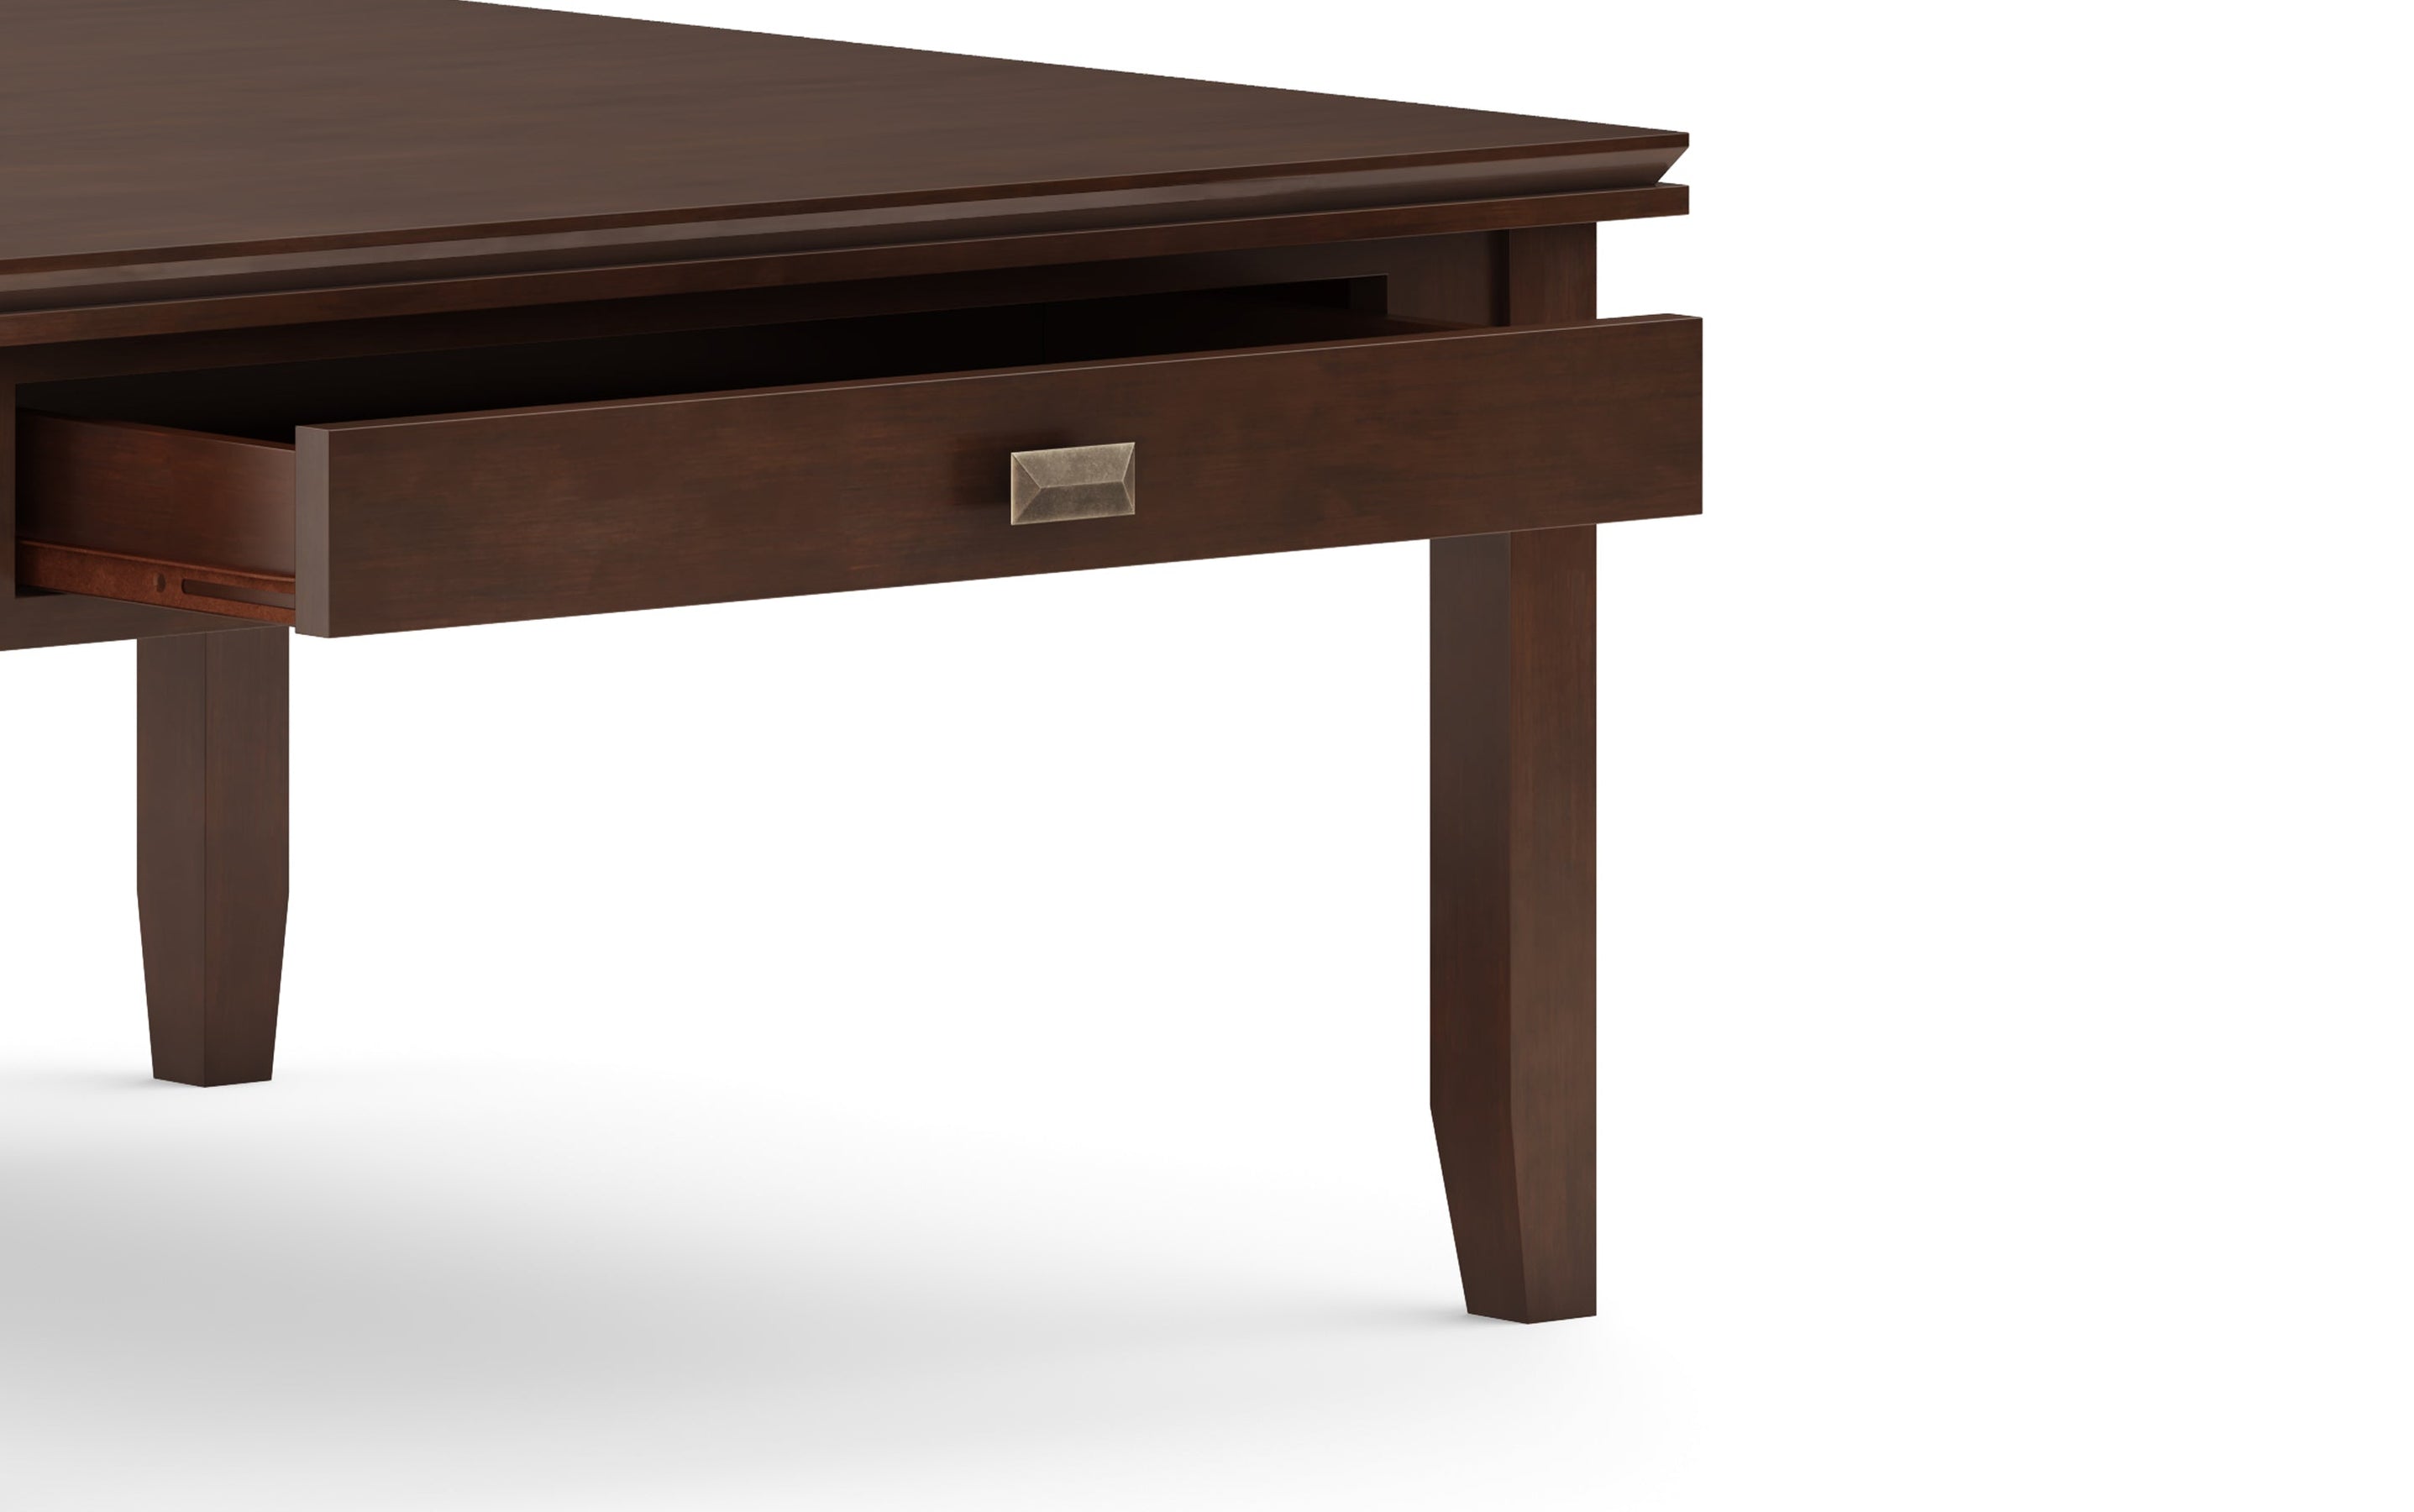 Russet Brown | Artisan Square Coffee Table